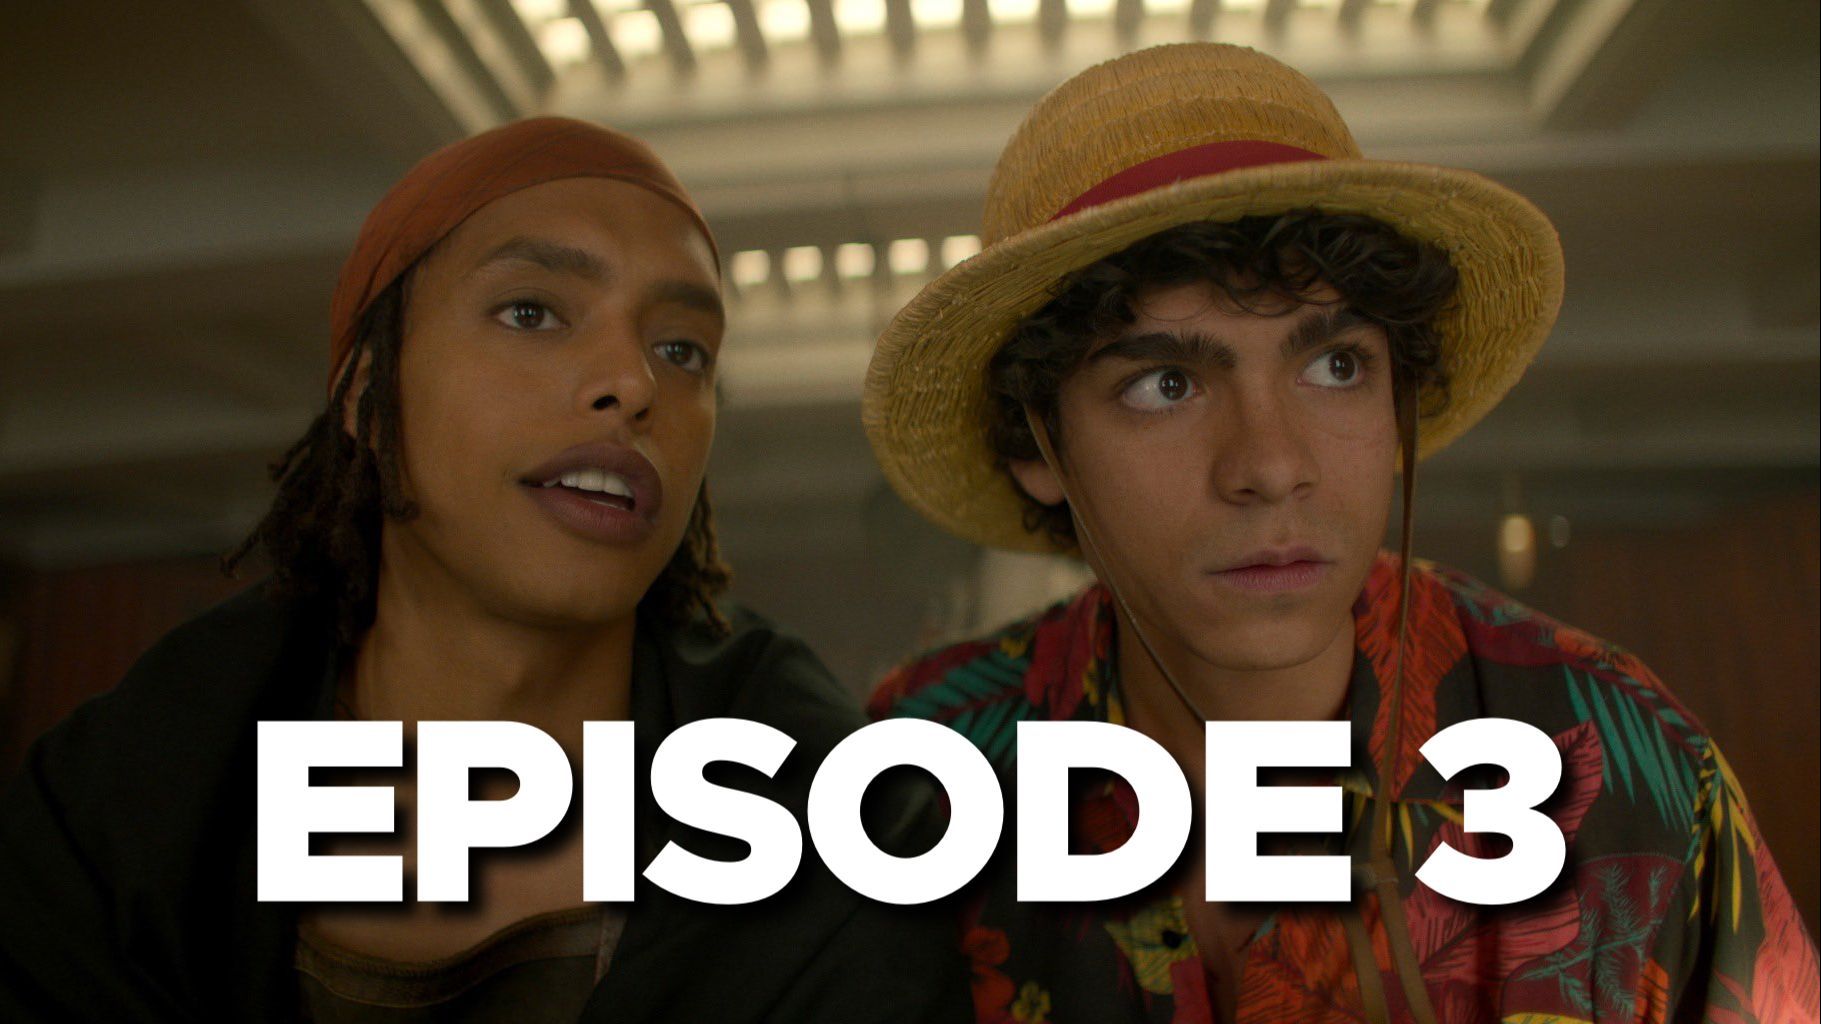 One Piece Live-Action Episode 3 Recap: The Boy who Cried Wolf